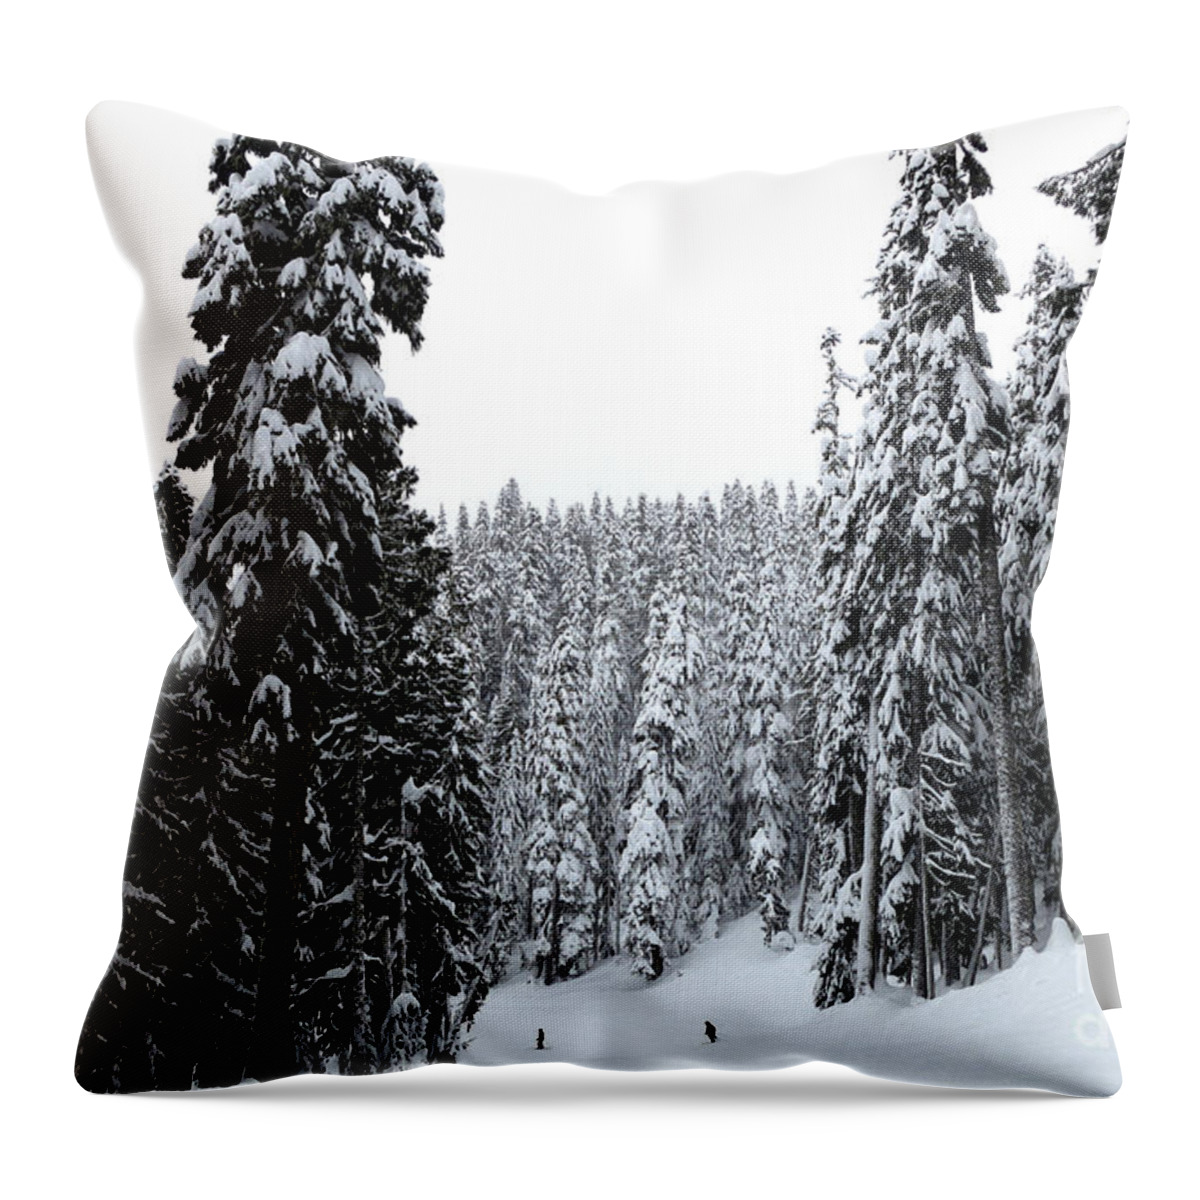 Ski Throw Pillow featuring the photograph Crystal Mountain Skiing 2 by Tatyana Searcy